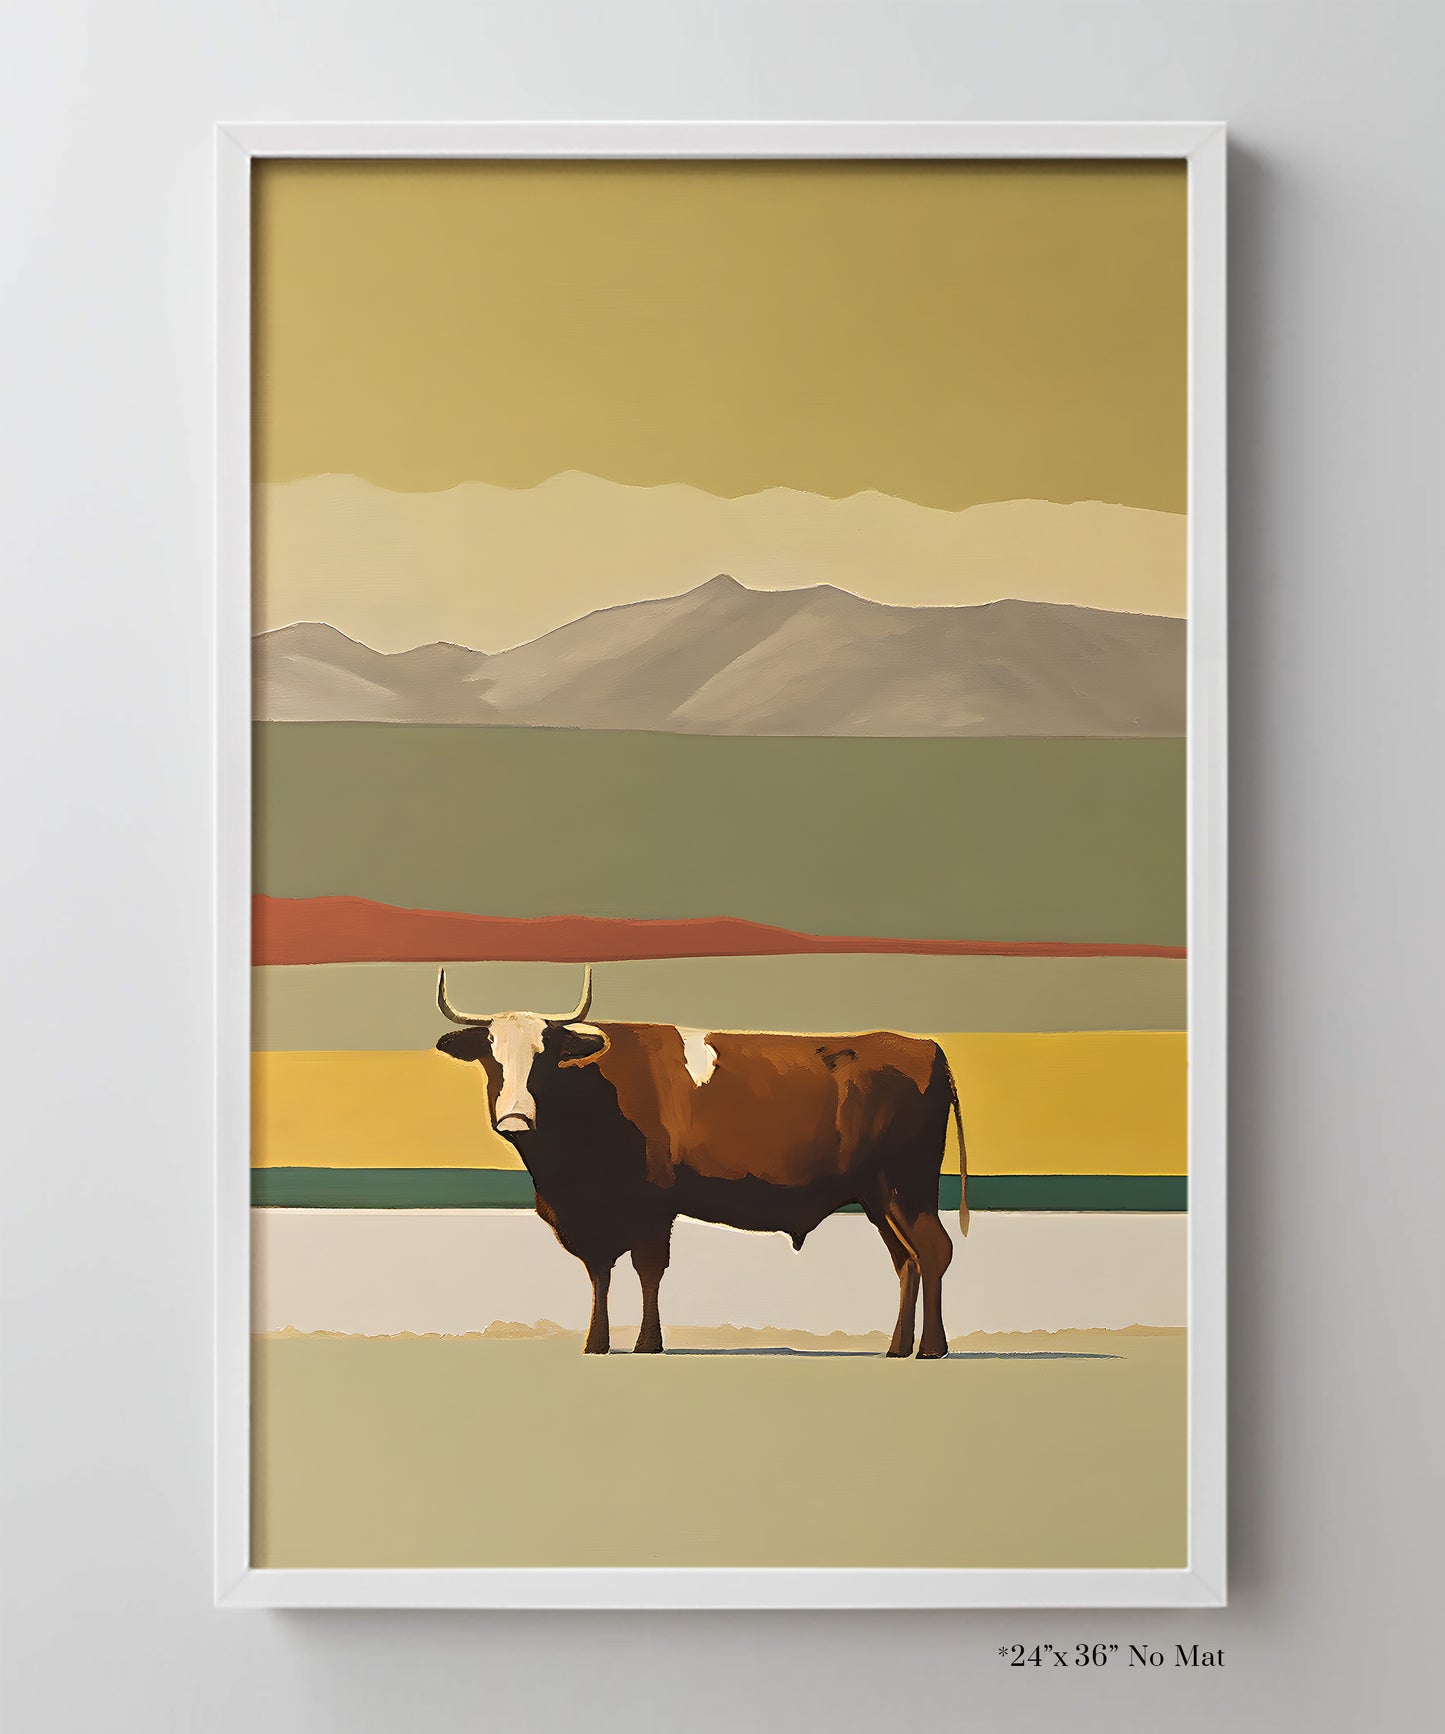 Home On the Range #1 - The Steer